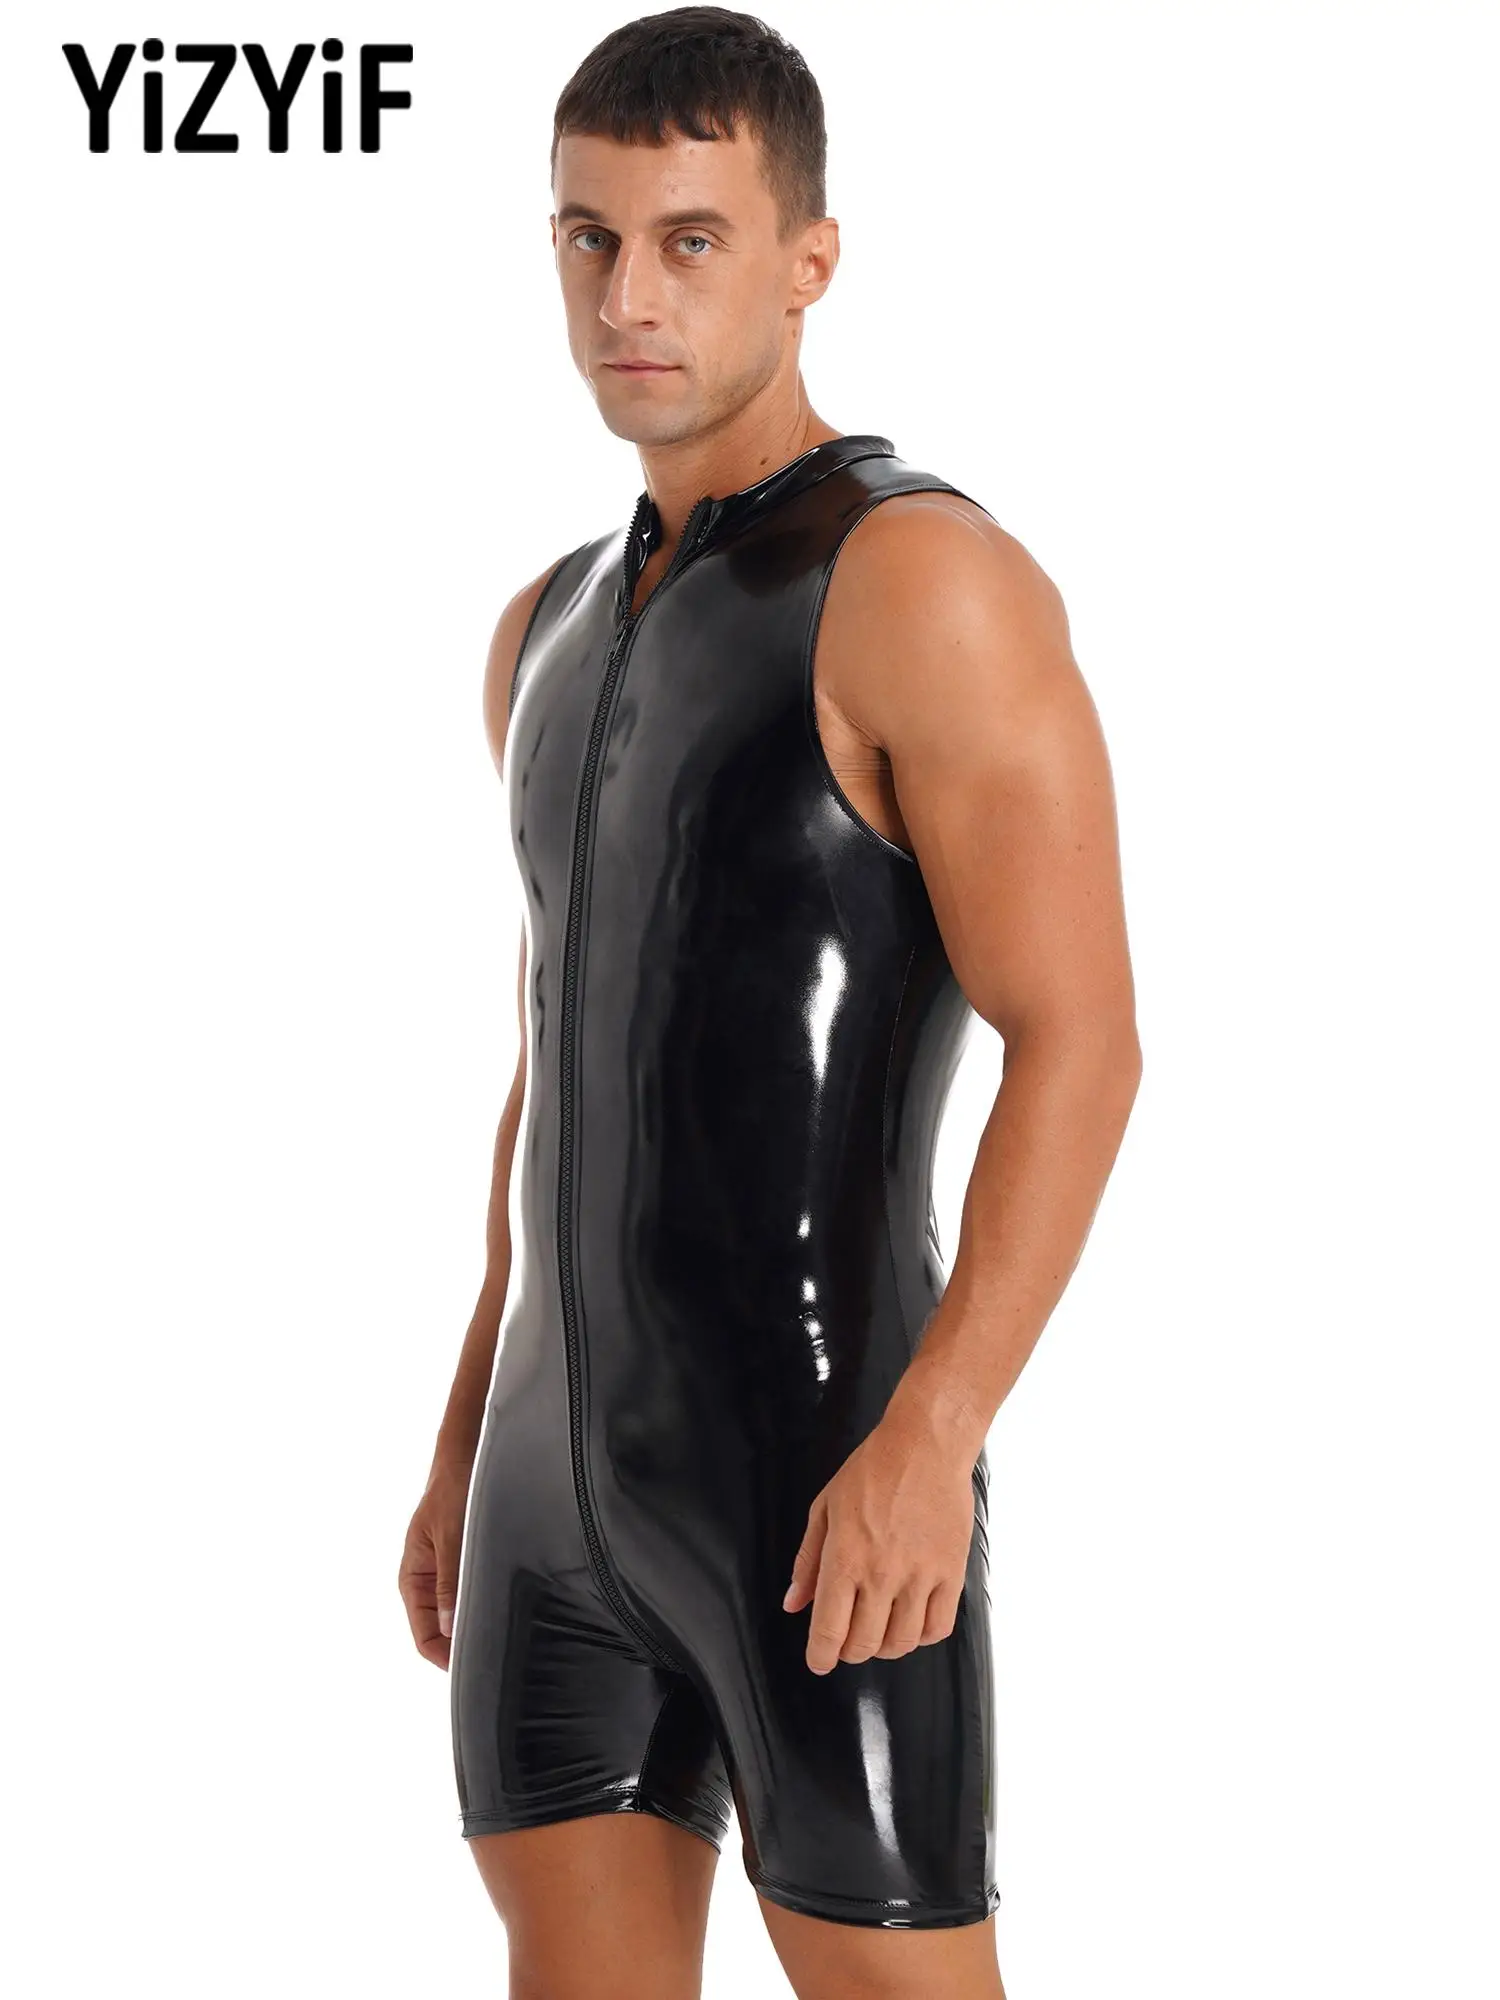 

Men One Piece Suits Rash Guard Swimsuit Sexy Wet Look Glossy PU Leather Bodysuit Sleeveless Zipper Crotch Pole Dancing Jumpsuits